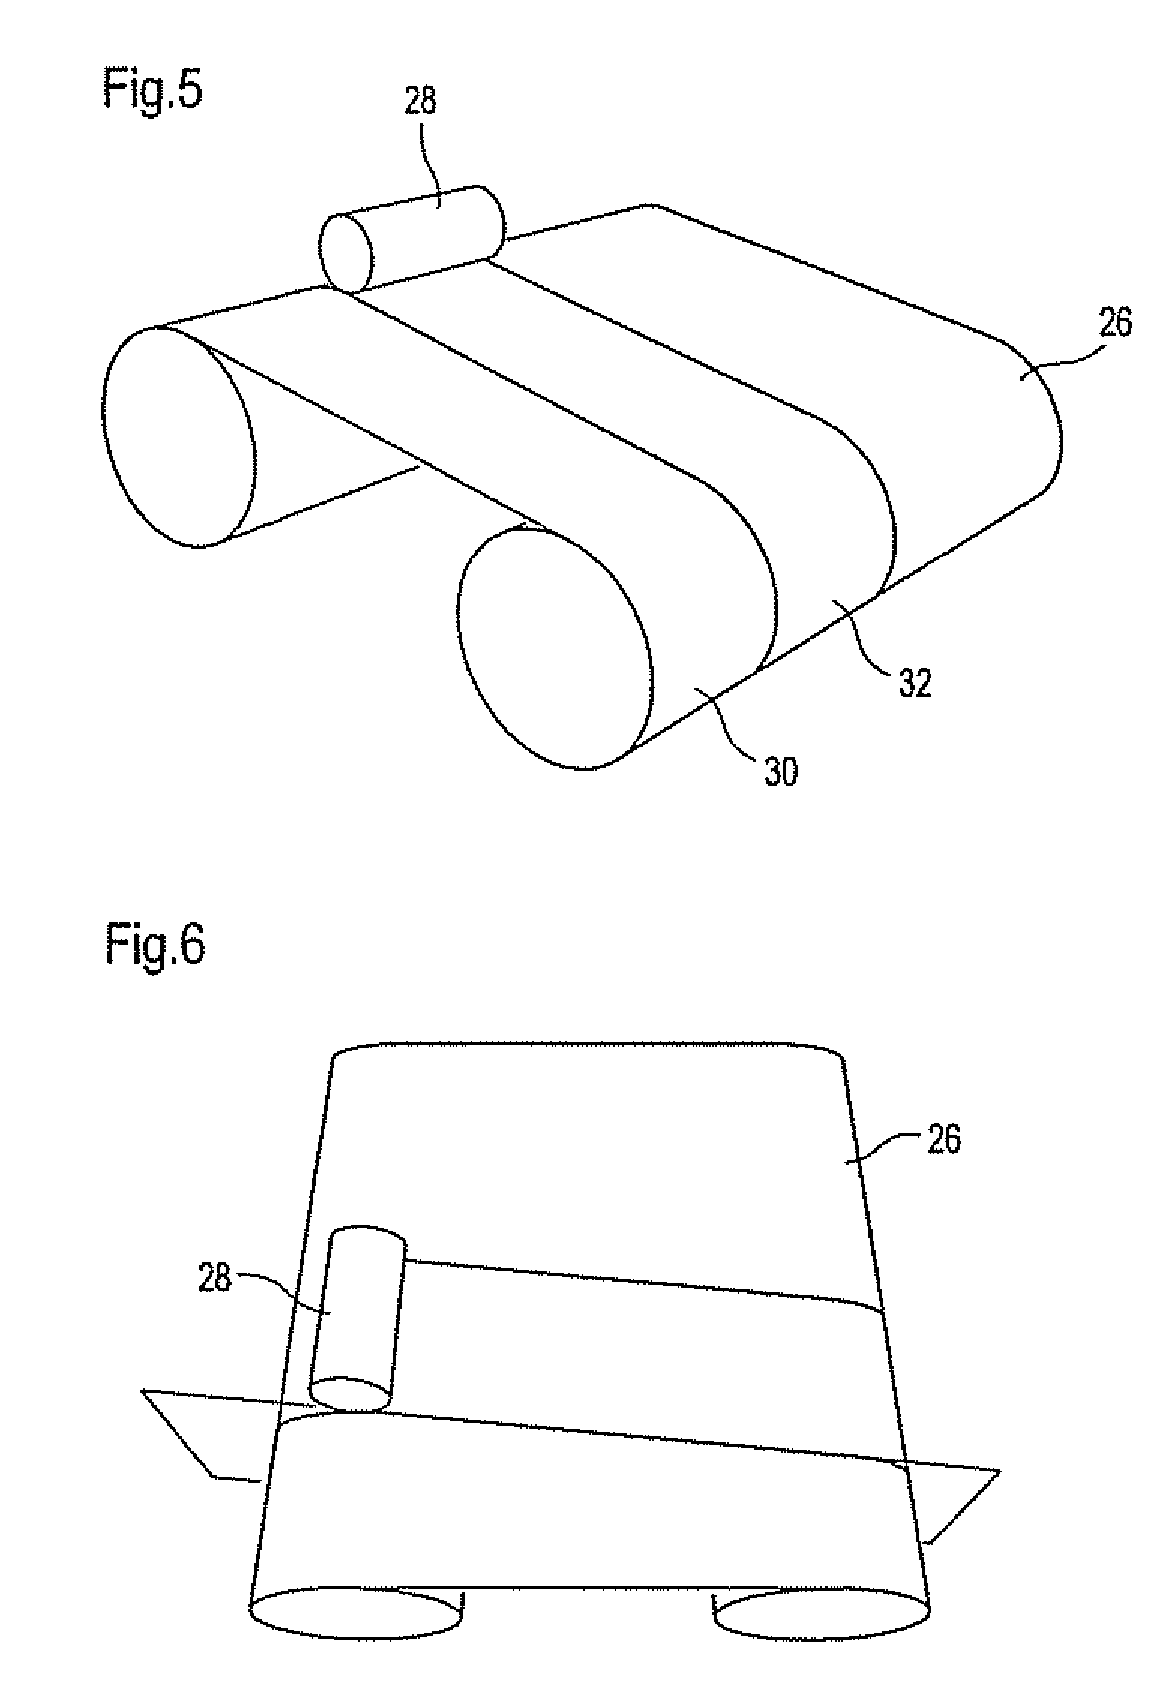 Method for producing topographical pattern on papermachine fabric by rotary screen printing of polymeric material